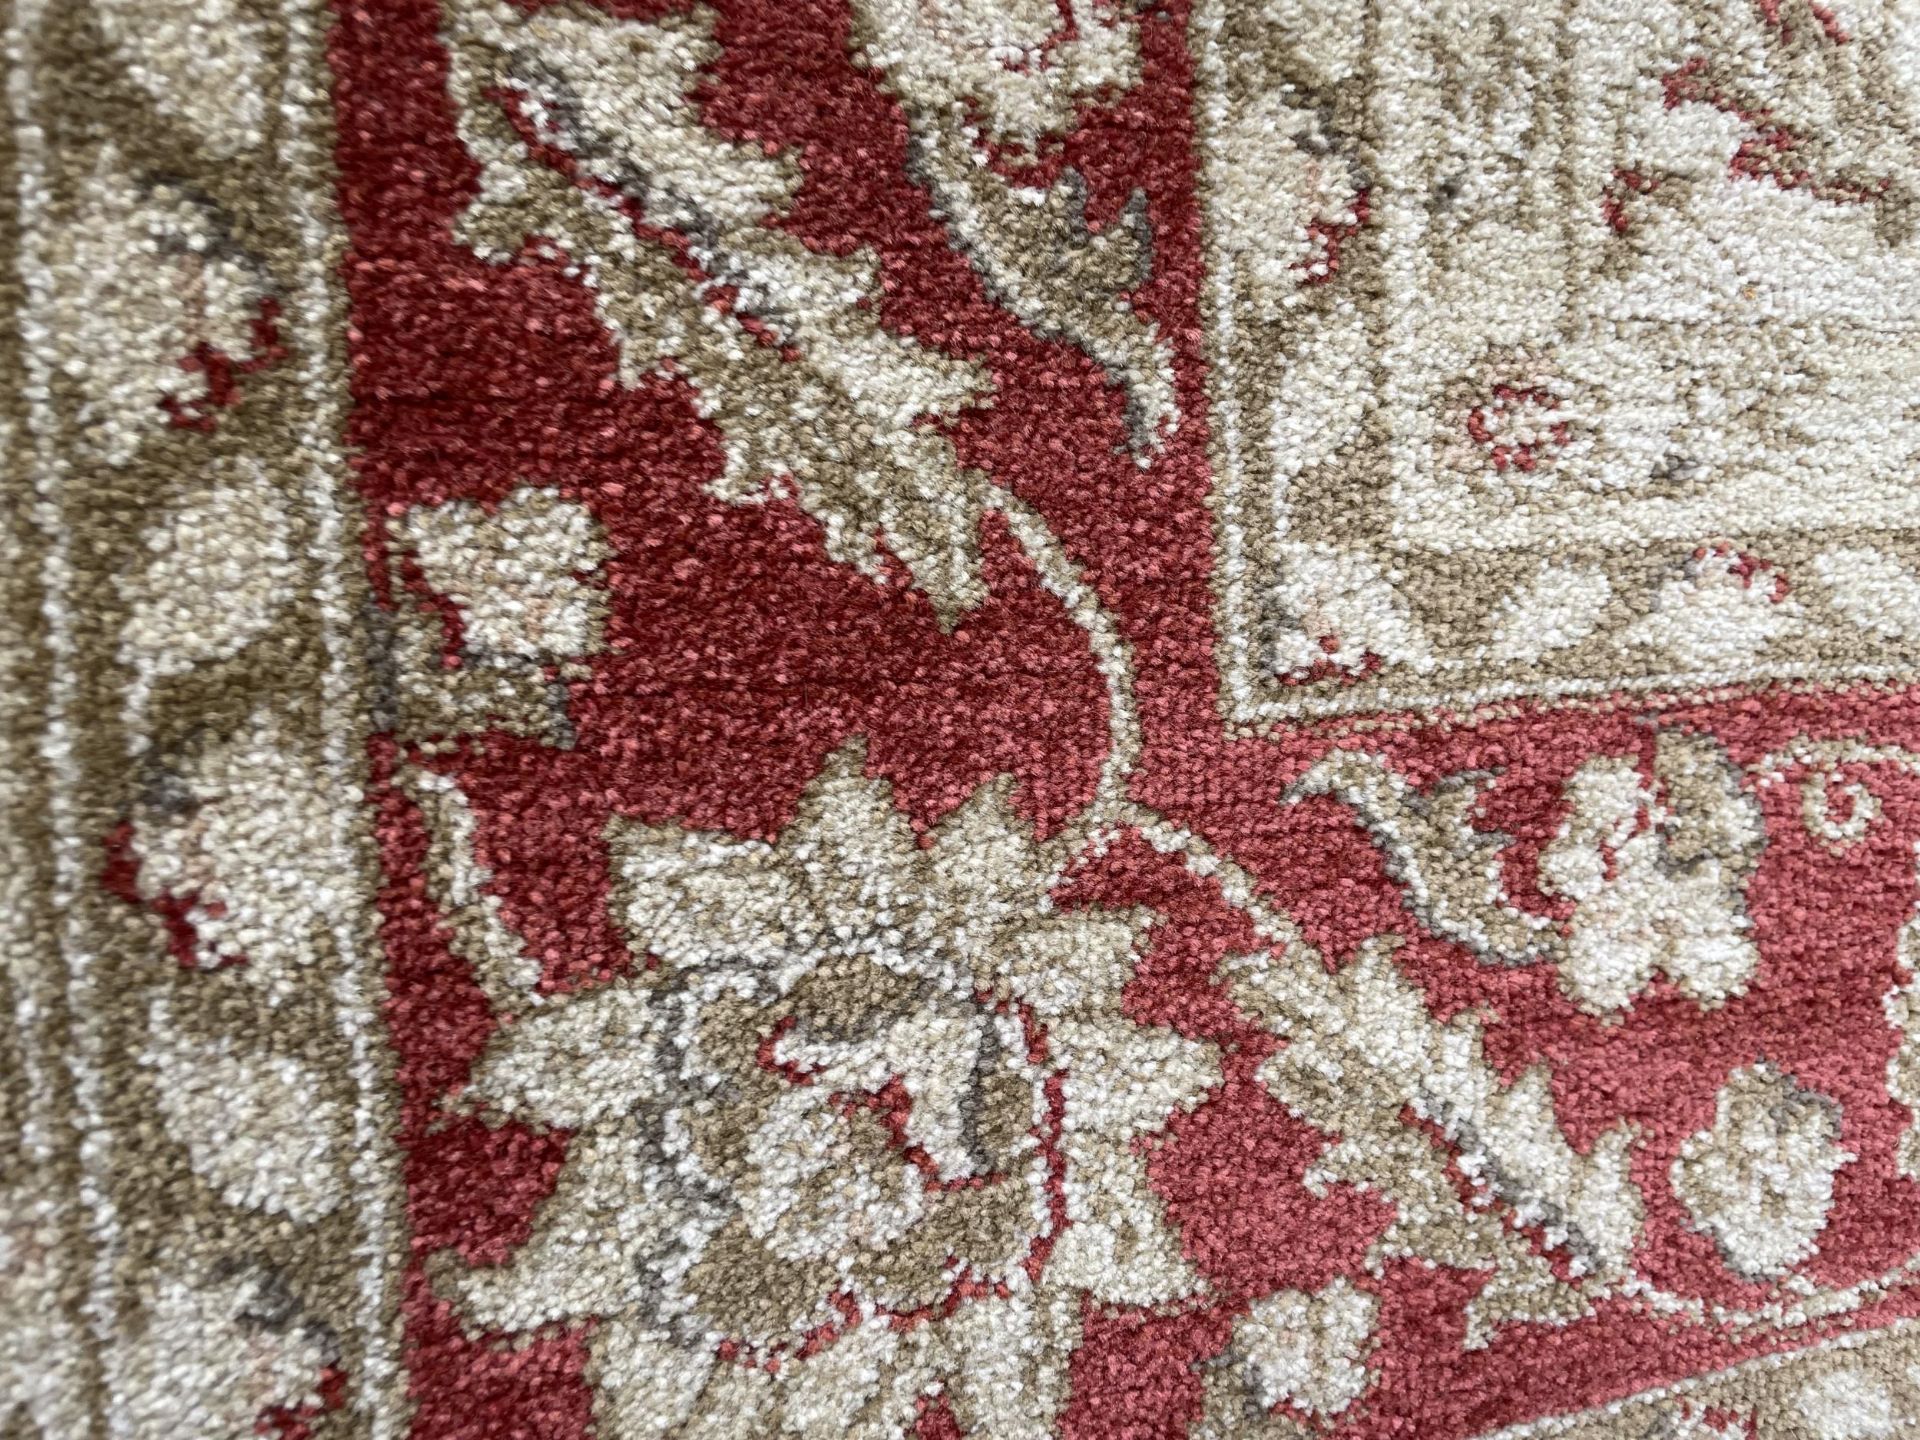 A LARGE RED AND CREAM PATTERNED RUG - Image 2 of 2